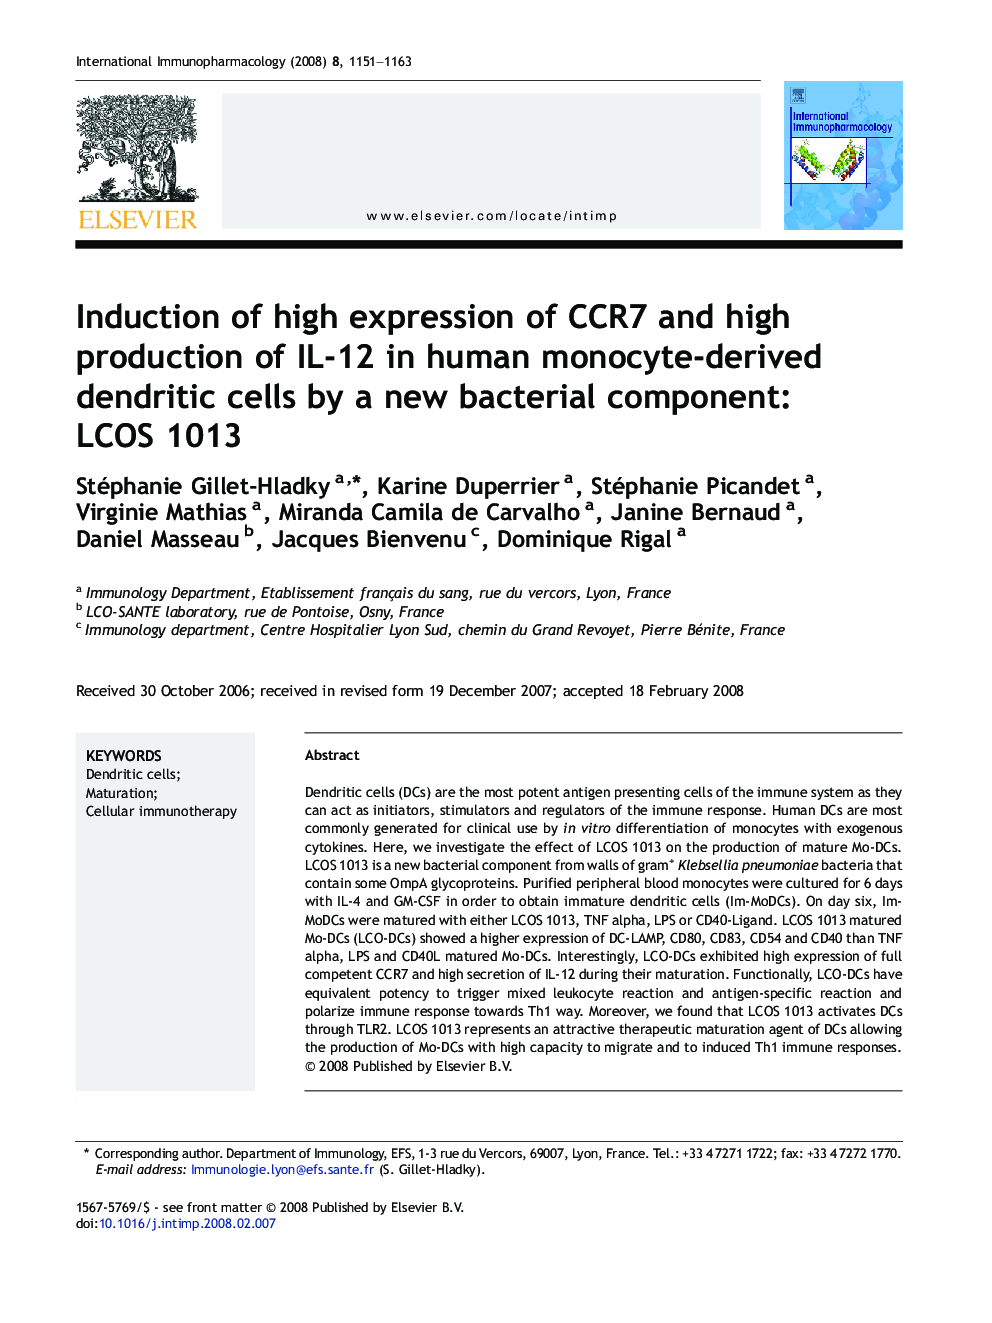 Induction of high expression of CCR7 and high production of IL-12 in human monocyte-derived dendritic cells by a new bacterial component: LCOS 1013